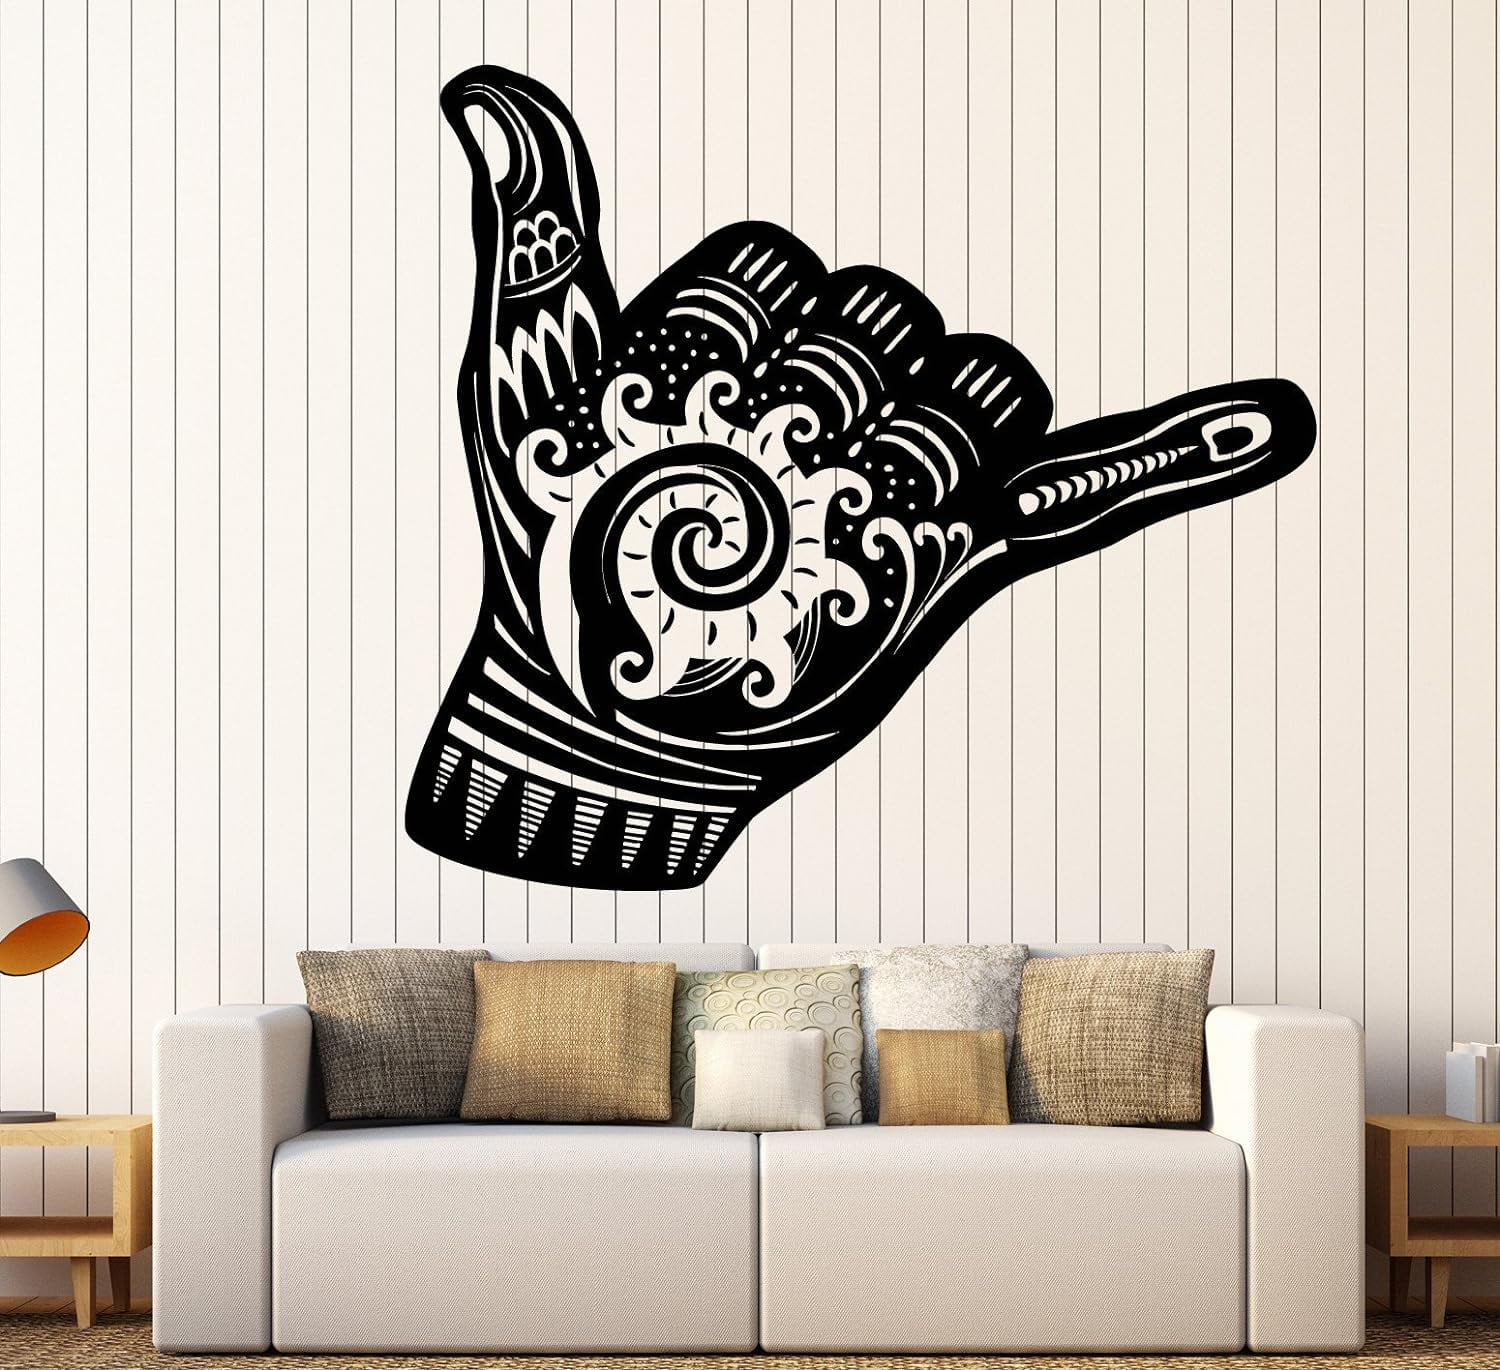 Large Vinyl Wall Decal Shaka Sign Hang Loose Surfing Stickers Mural ...